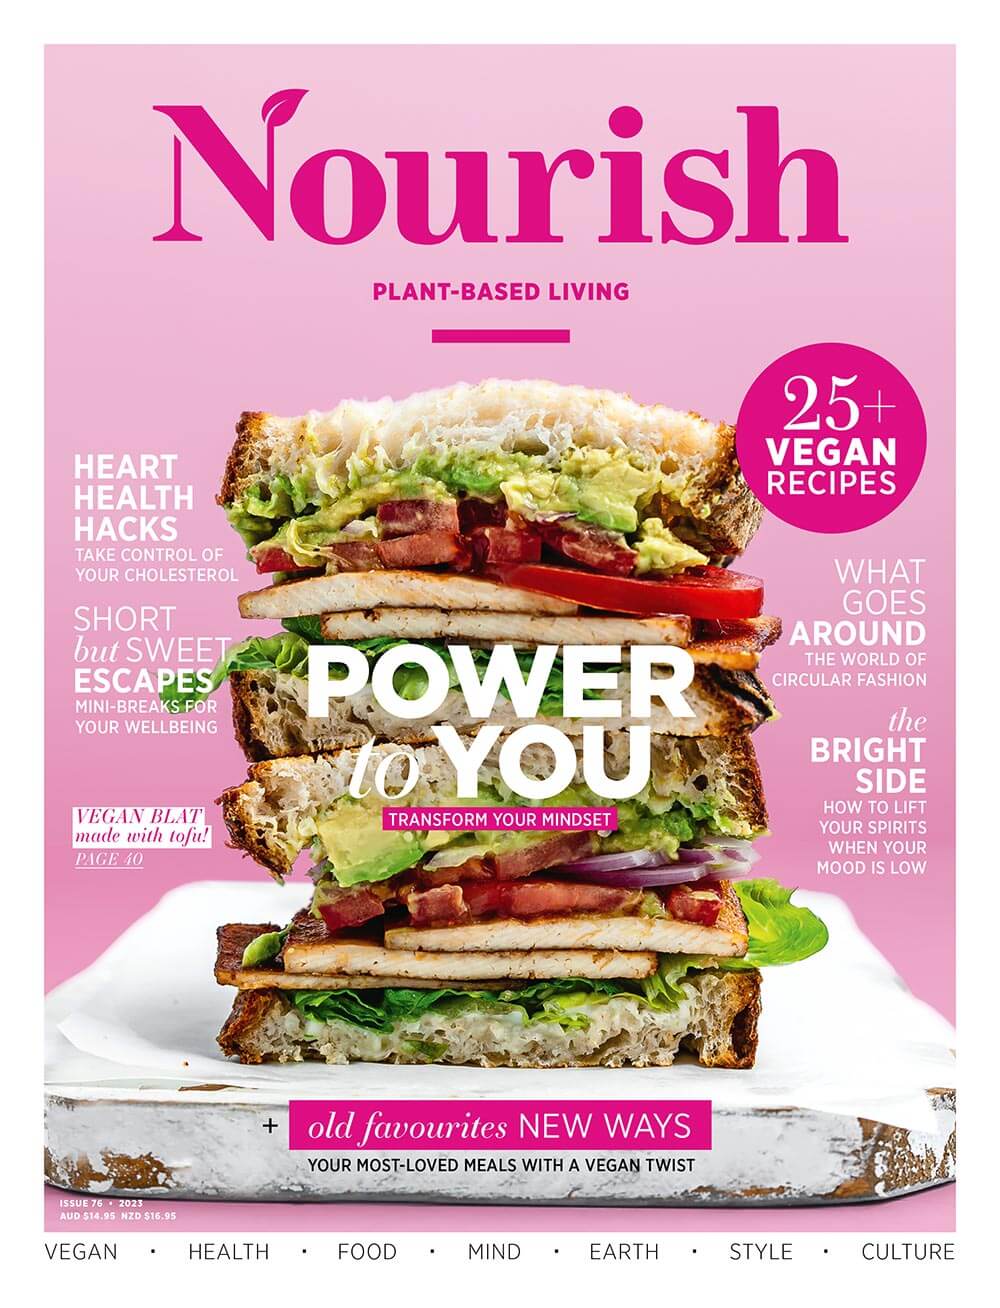 Subscribe to Nourish plant-based living